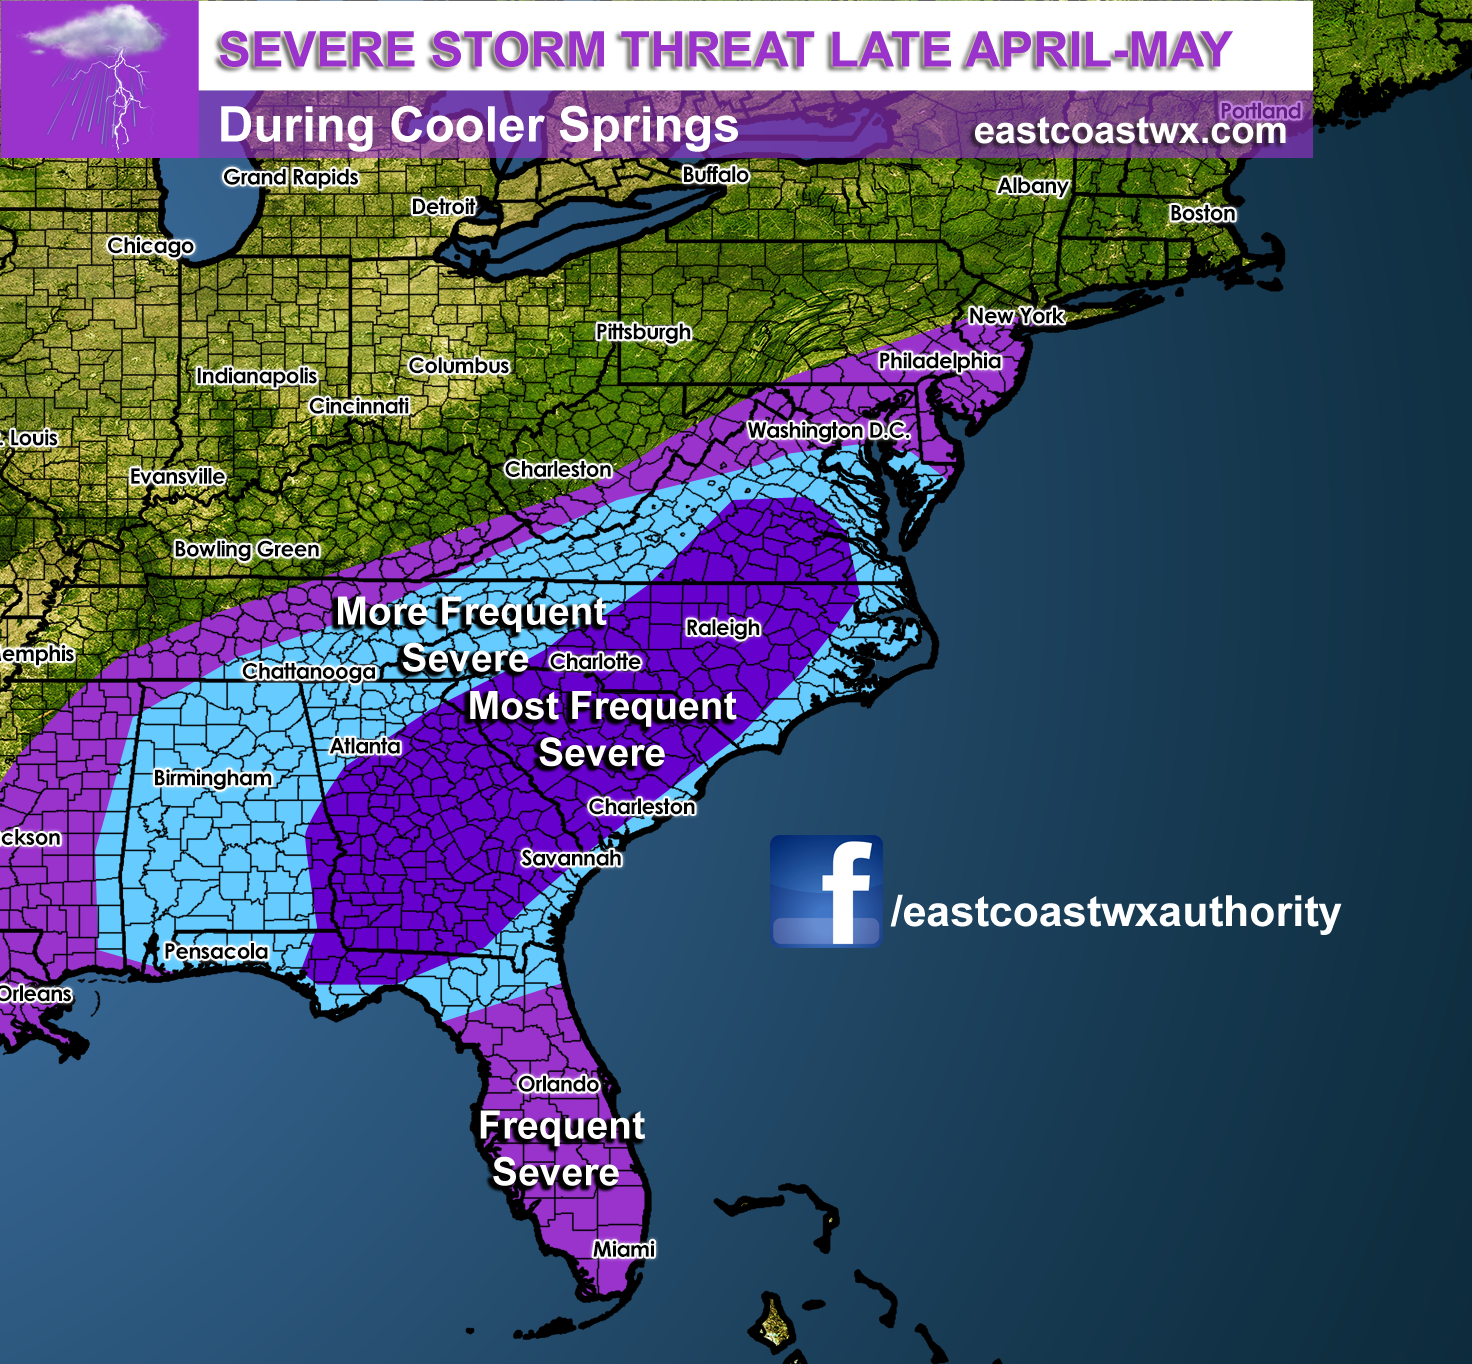 Frequent Severe Storms Likely During Cooler Springs - Carolina Weather Authority1472 x 1364